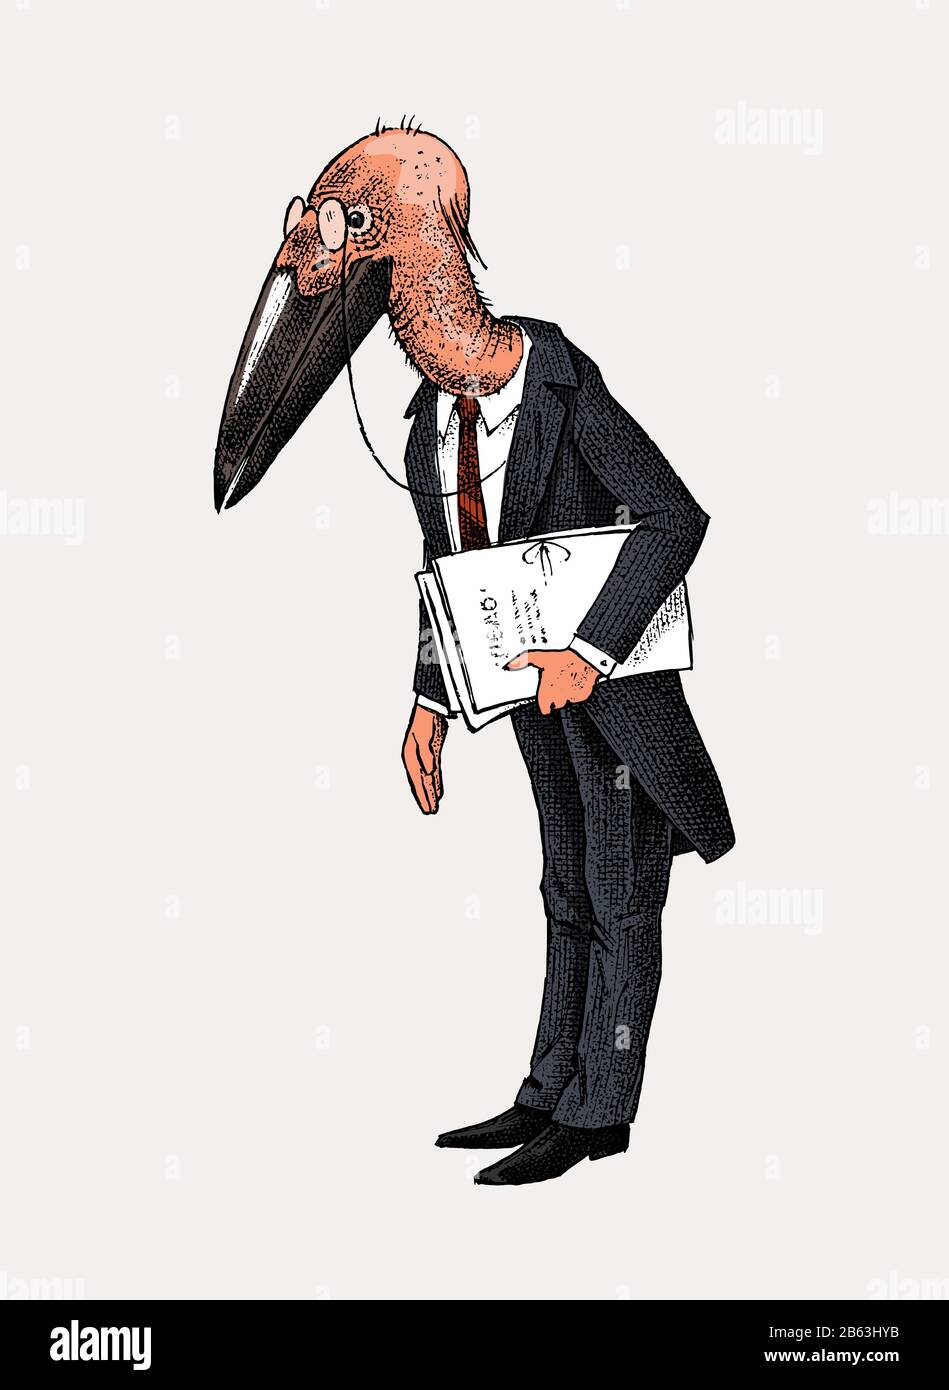 Marabou character. Bird man or Lawyer in a classic office suit with documents. Hand drawn fashionable stork. Engraved old monochrome sketch. Stock Vector